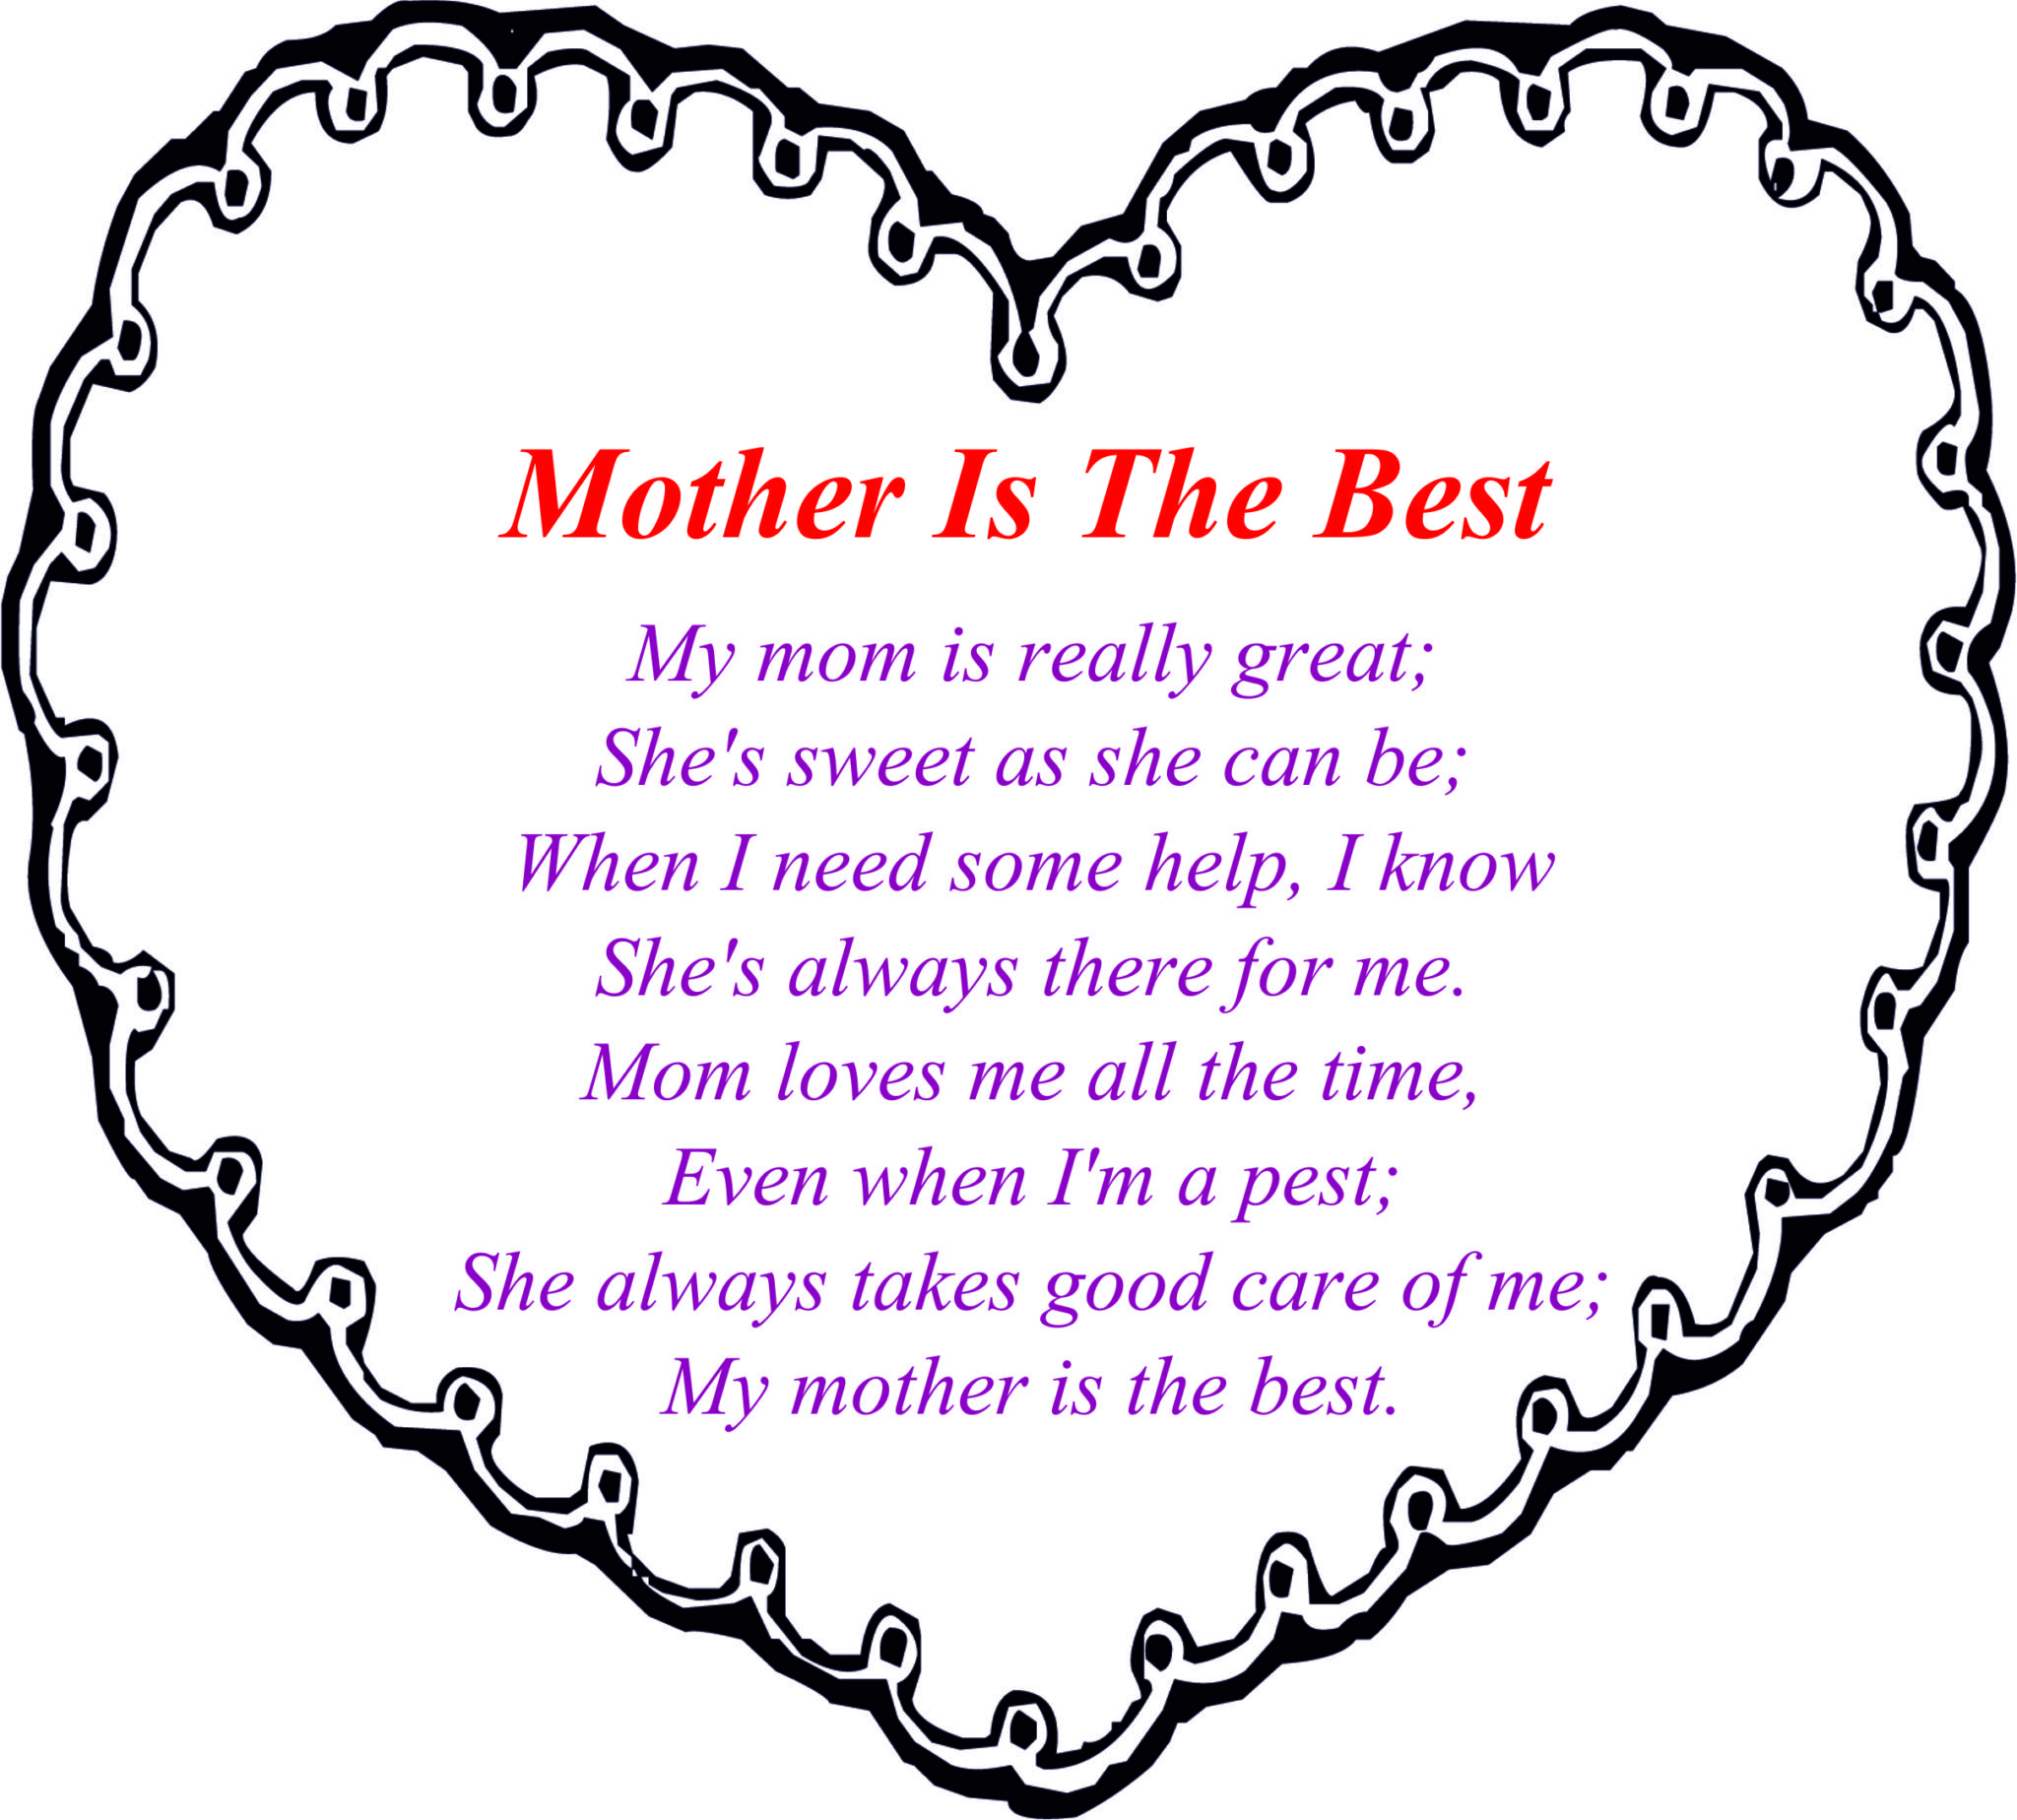 Mother is the Best poem.